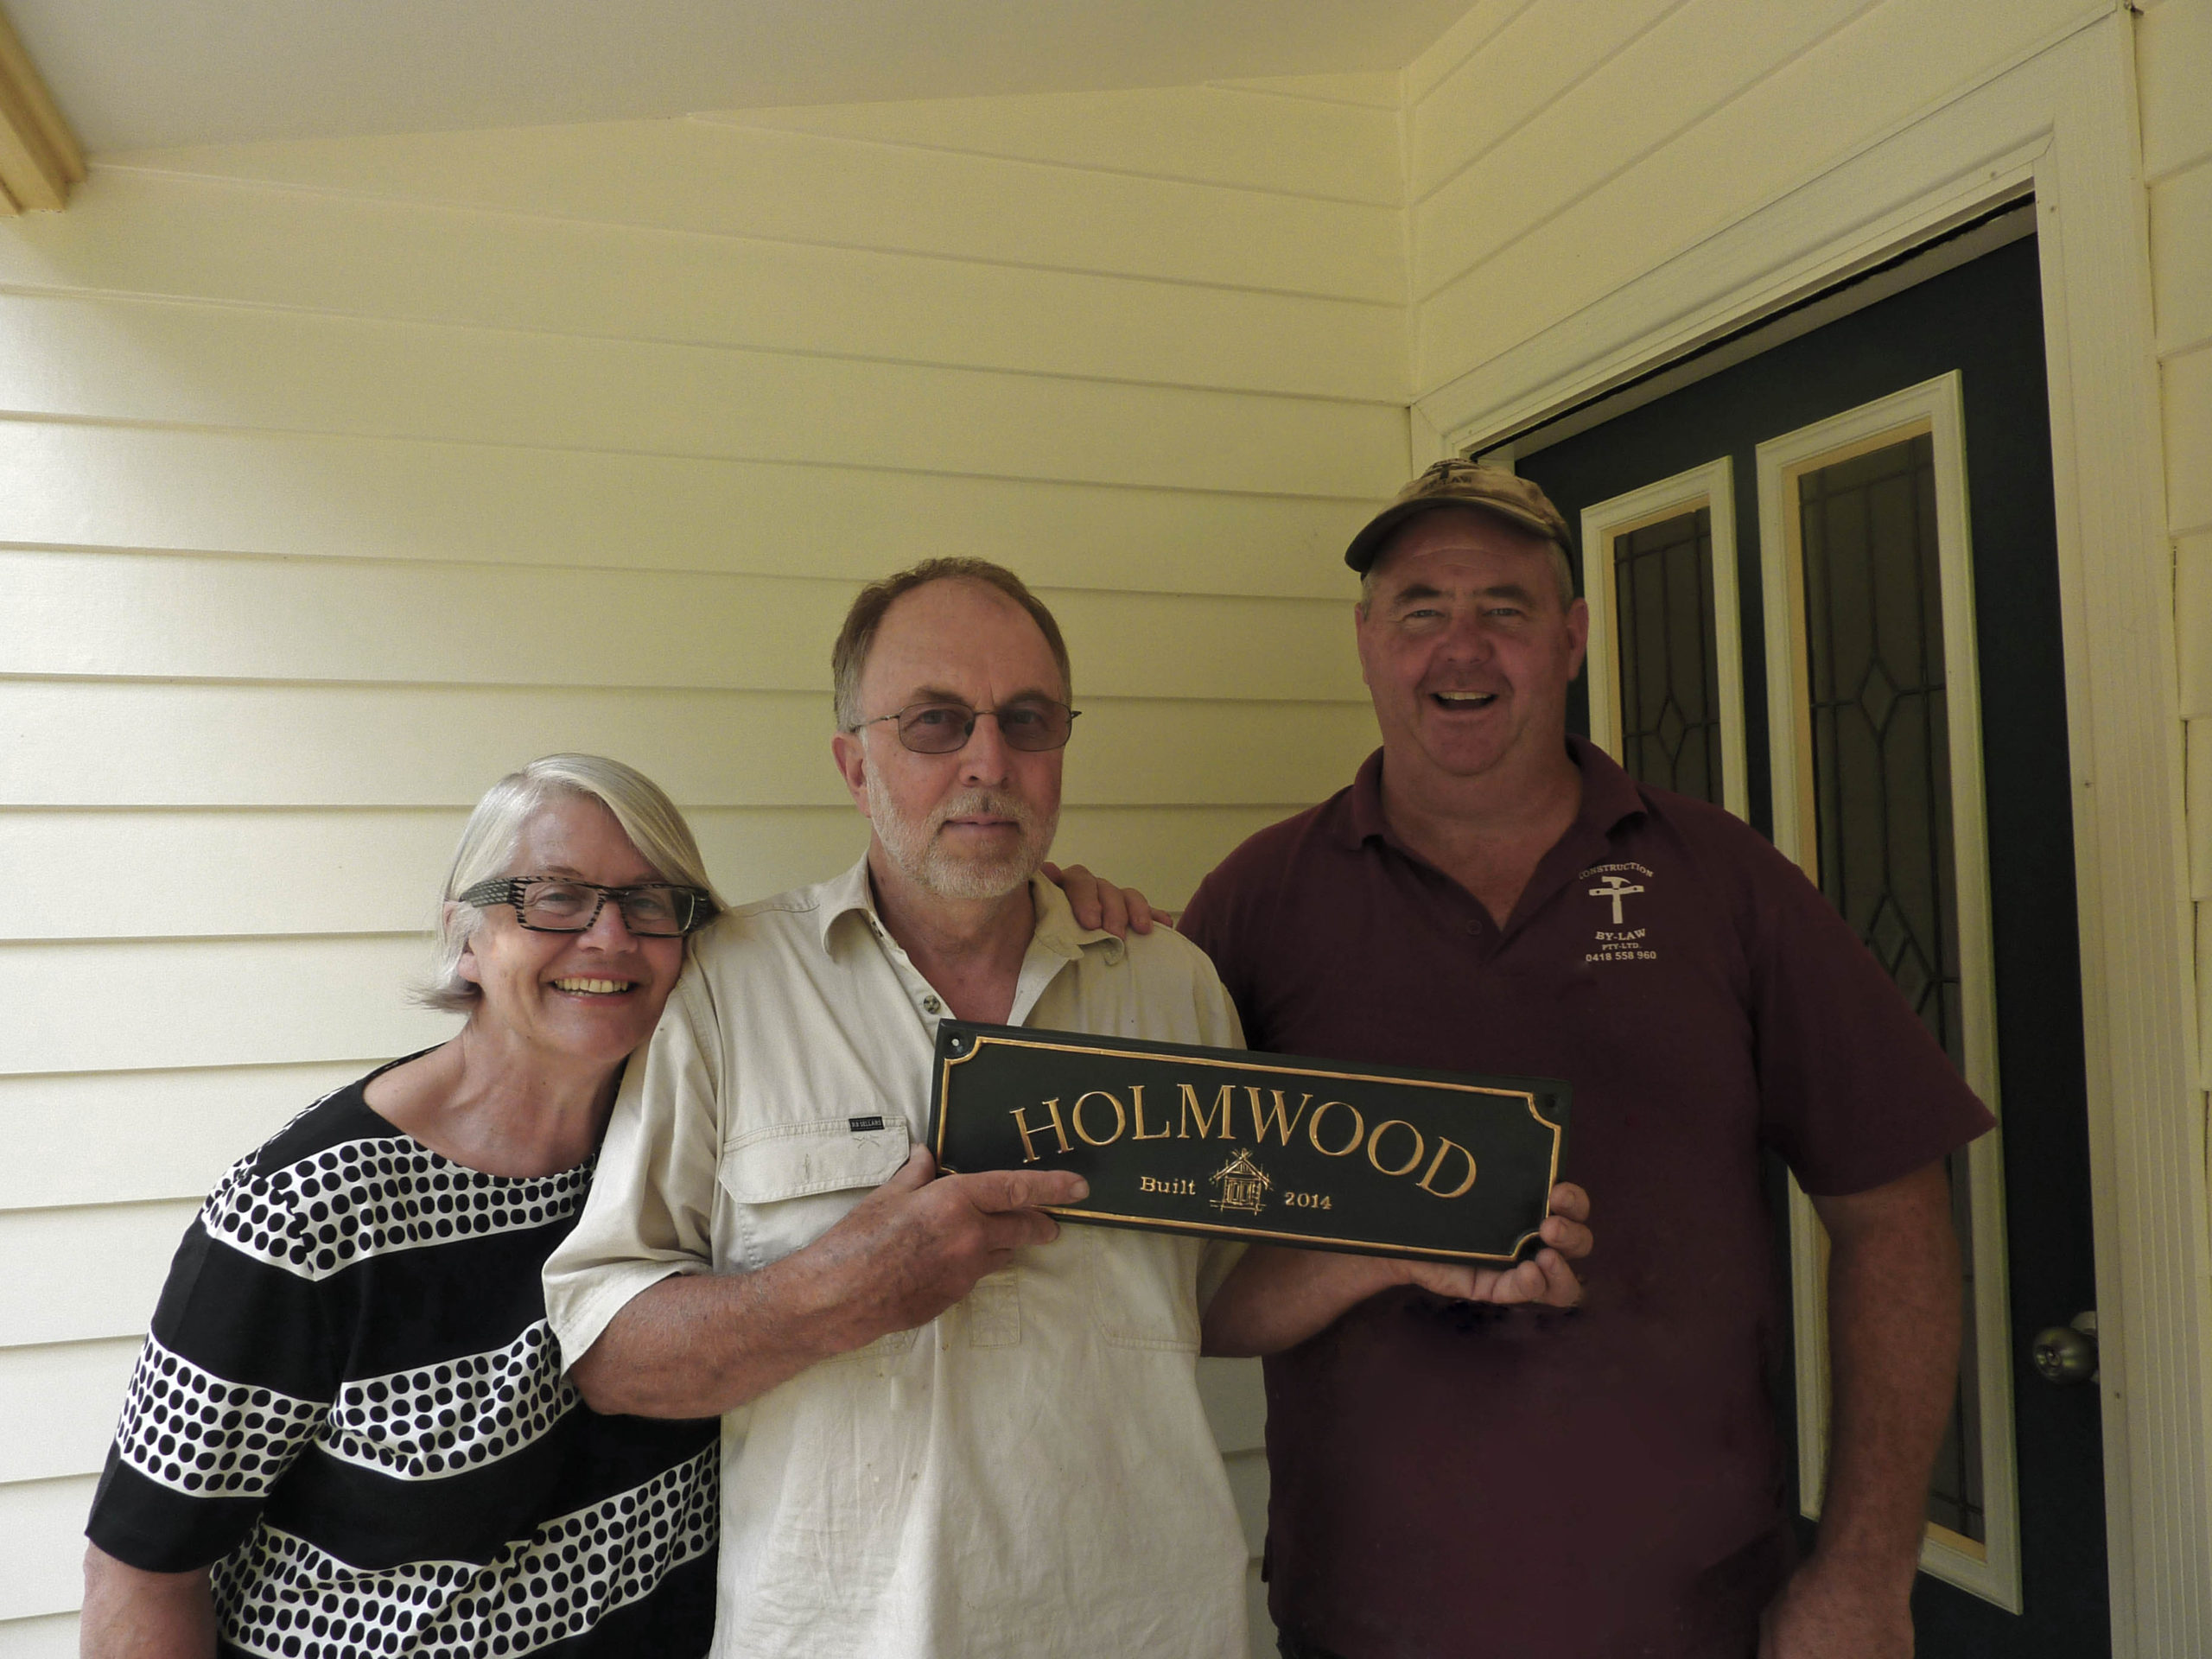 Holmwood - Pam and Ewen with Doug the builder built by Farm Houses of Australia